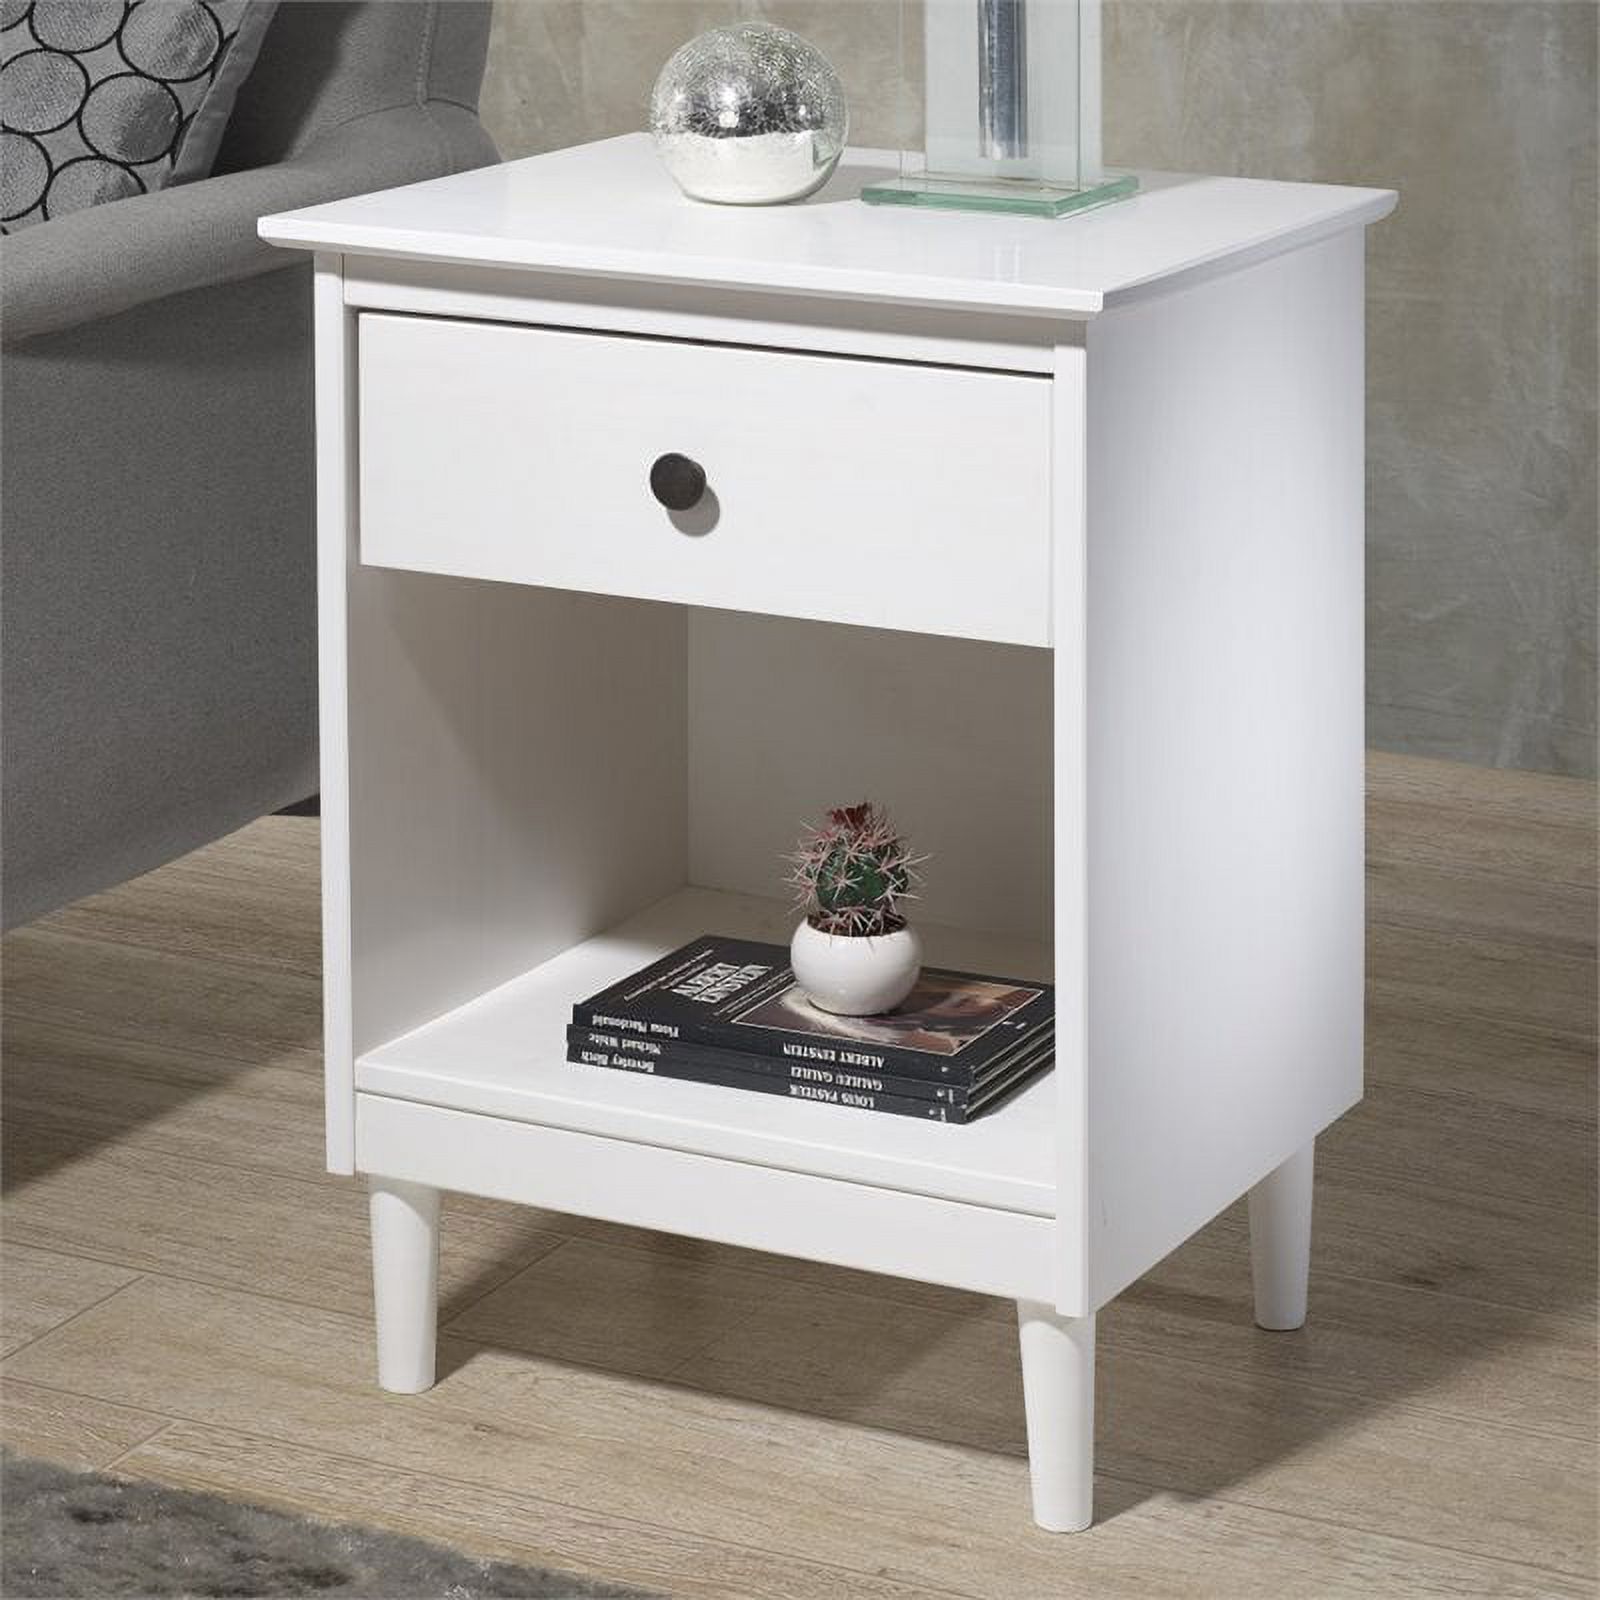 1 Drawer Solid Wood Nightstand in White - image 4 of 4